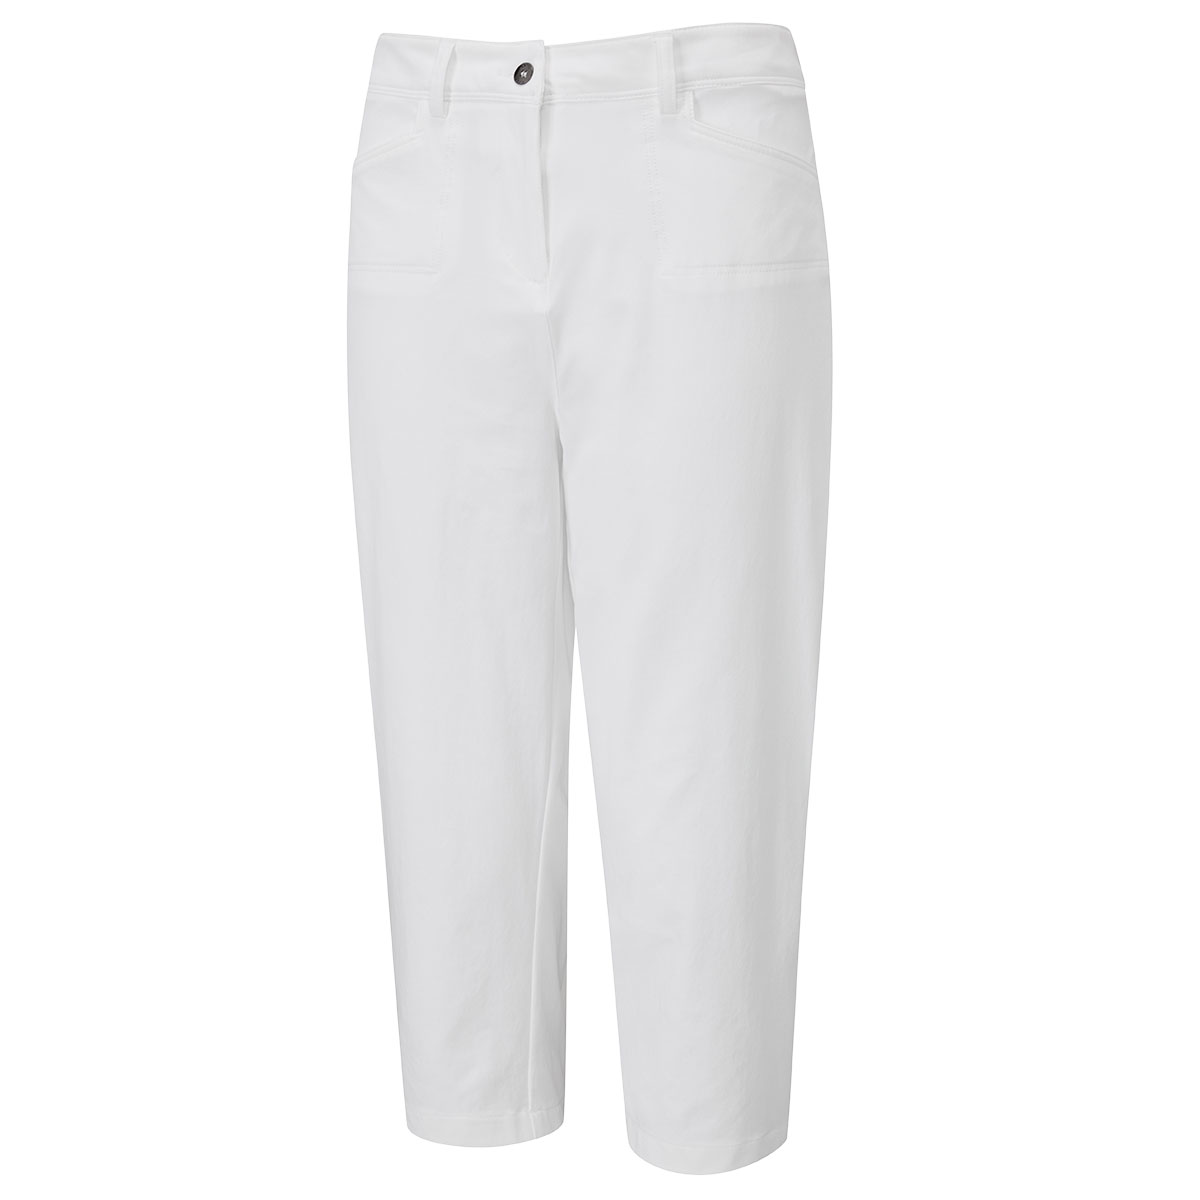 Mens golf clothing in Surrey